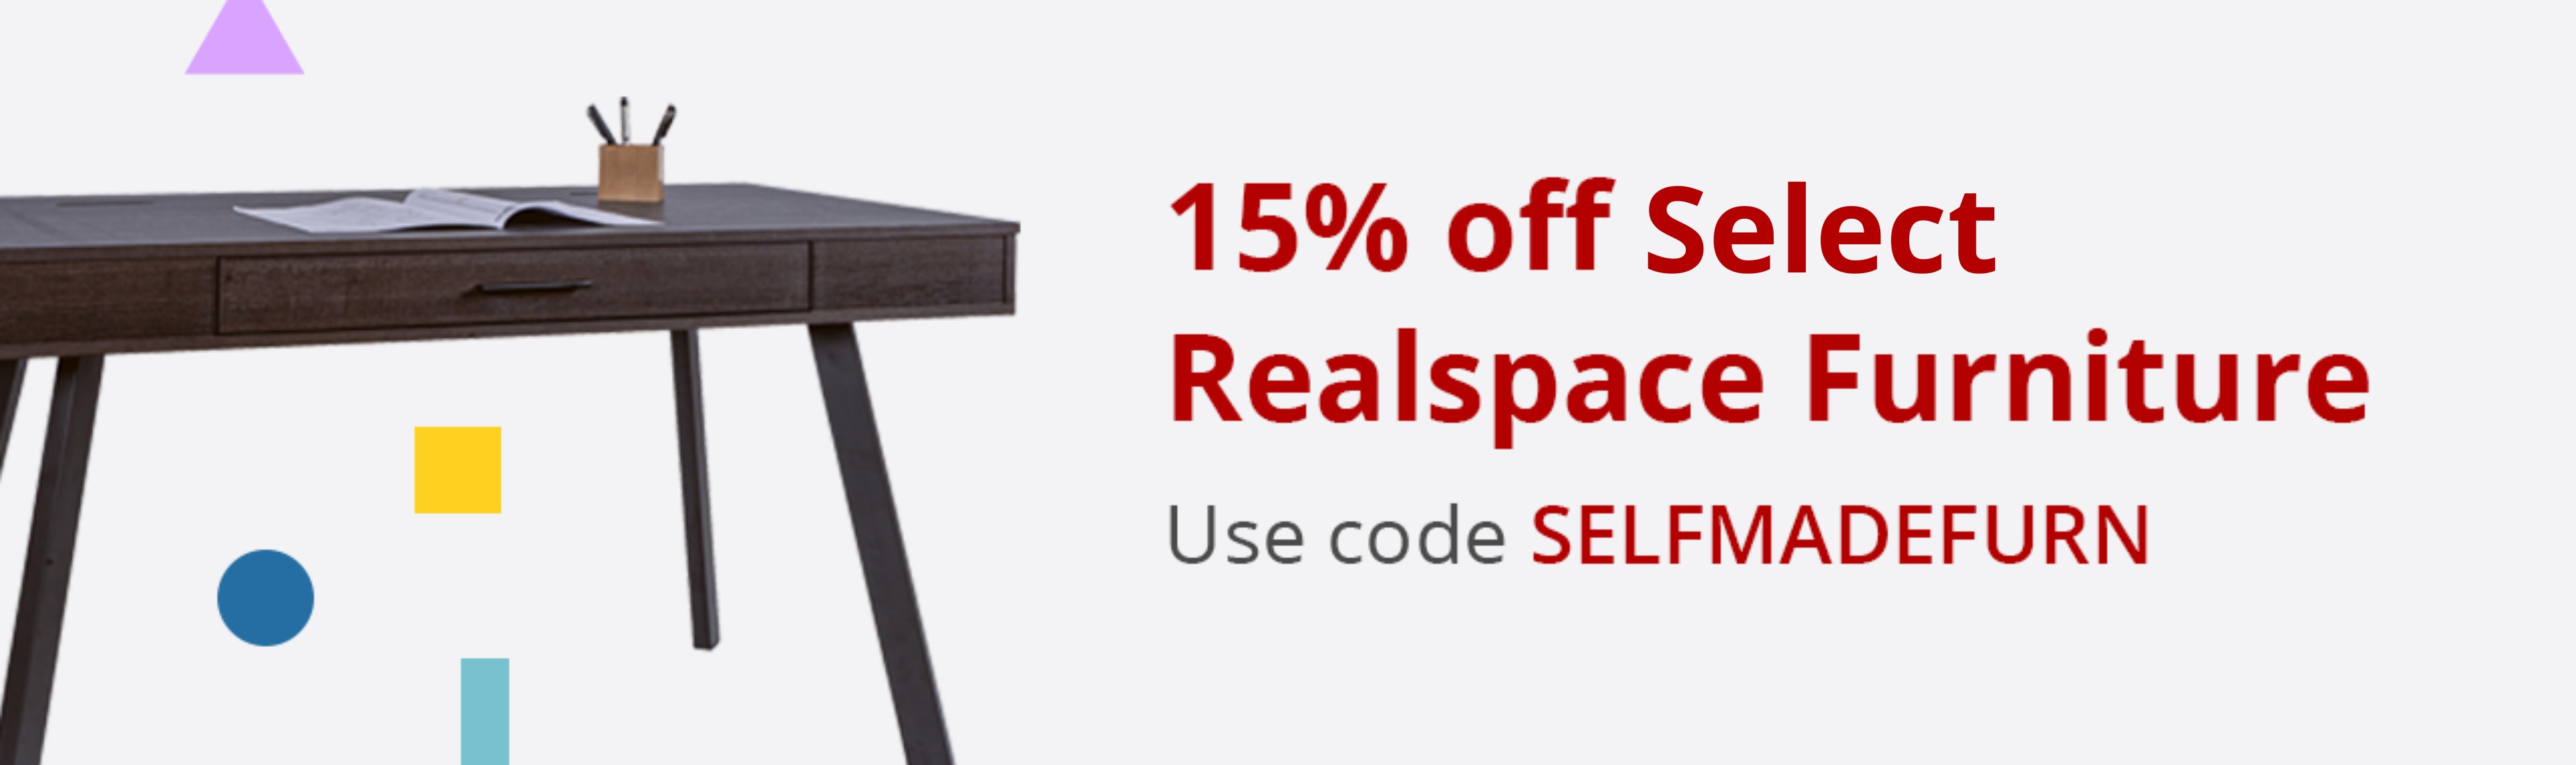 15% off select Realspace furniture 